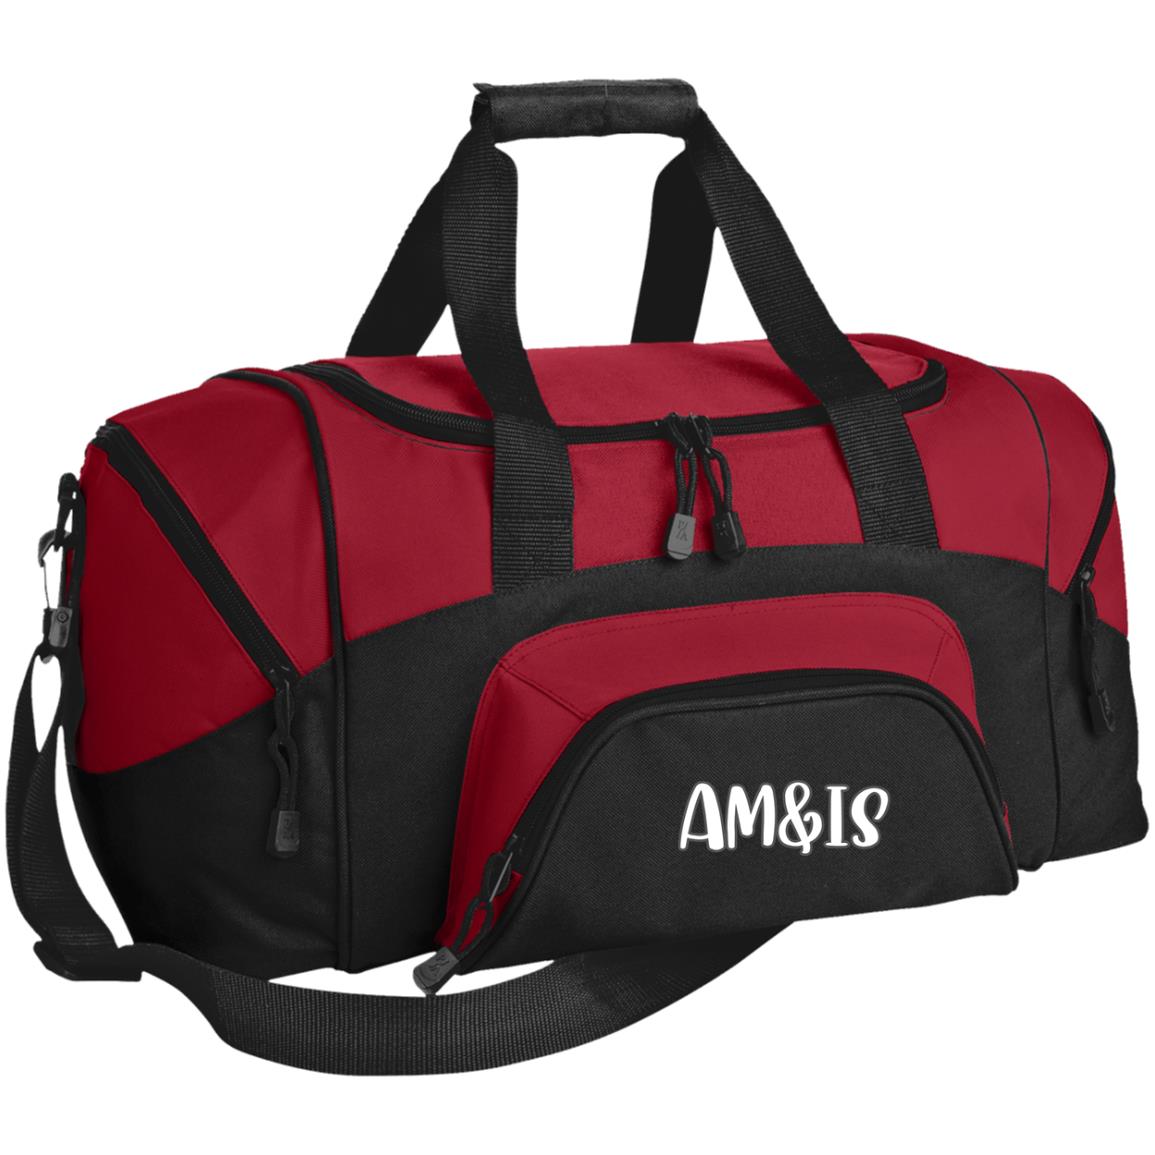 BLACK/TRUE RED ONE SIZE - AM&IS Activewear Small Colorblock Sport Duffel Bag - duffel bag at TFC&H Co.